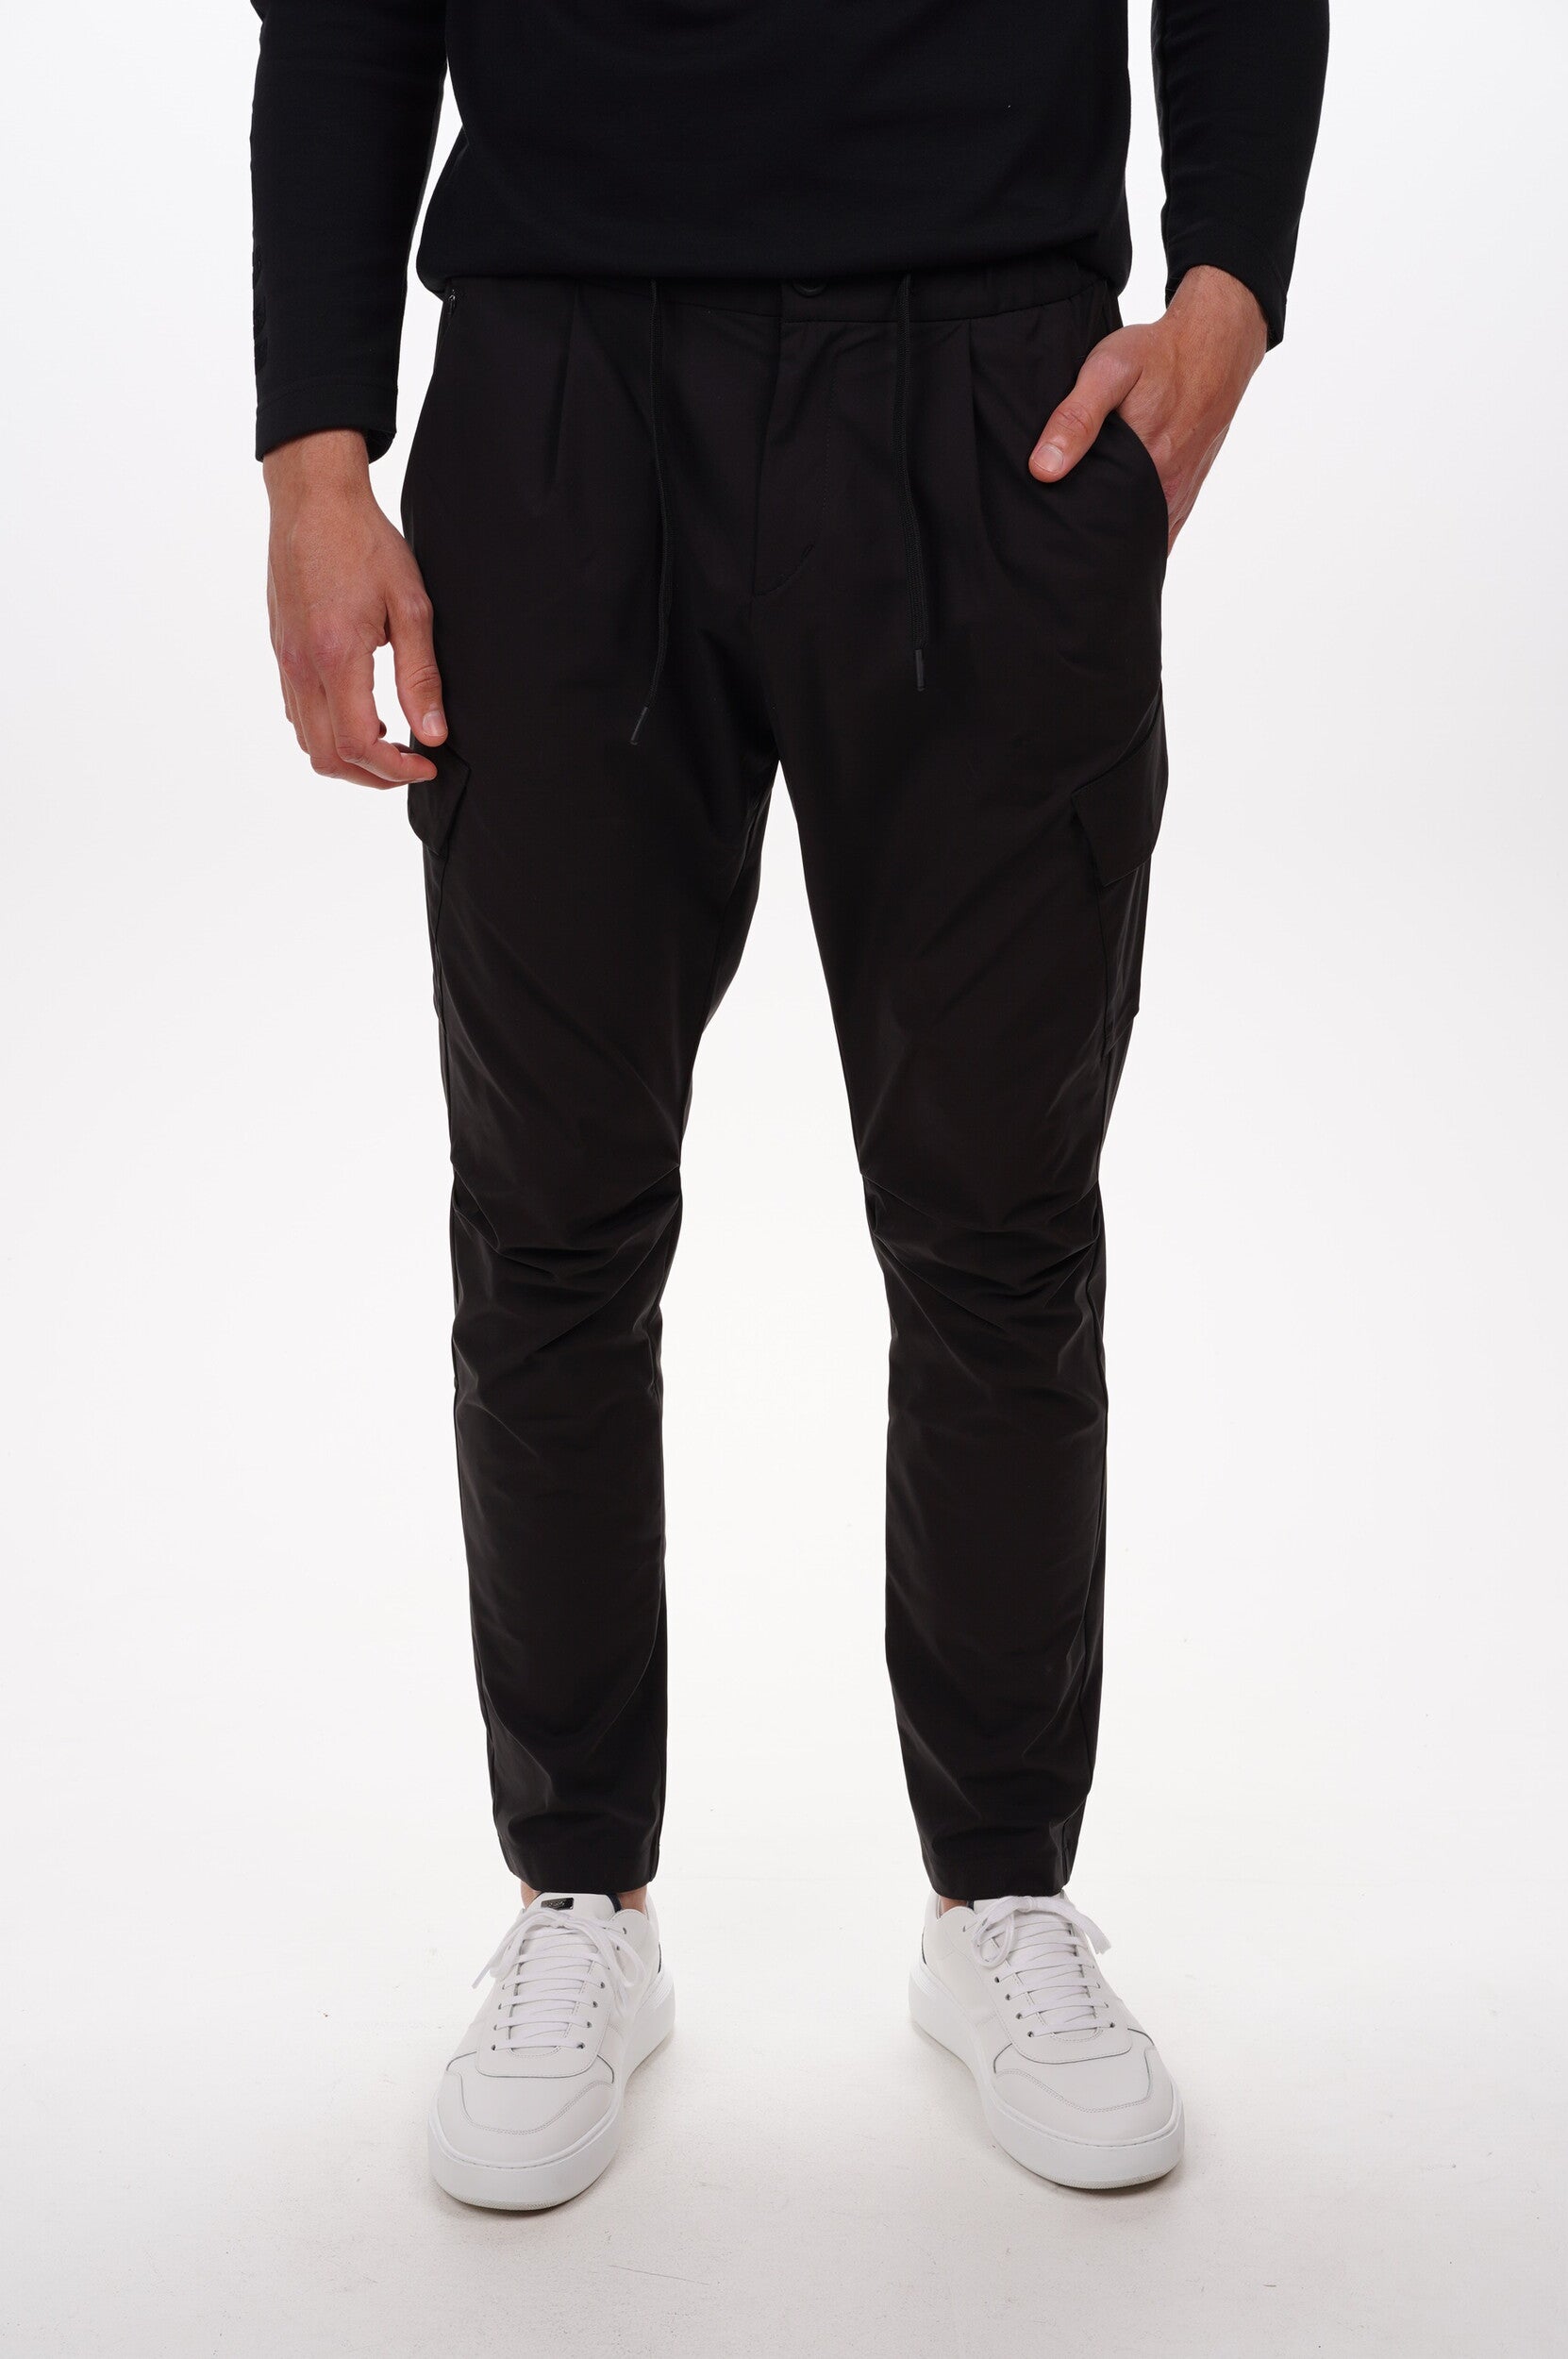 HERNO Trousers Men's woven pants